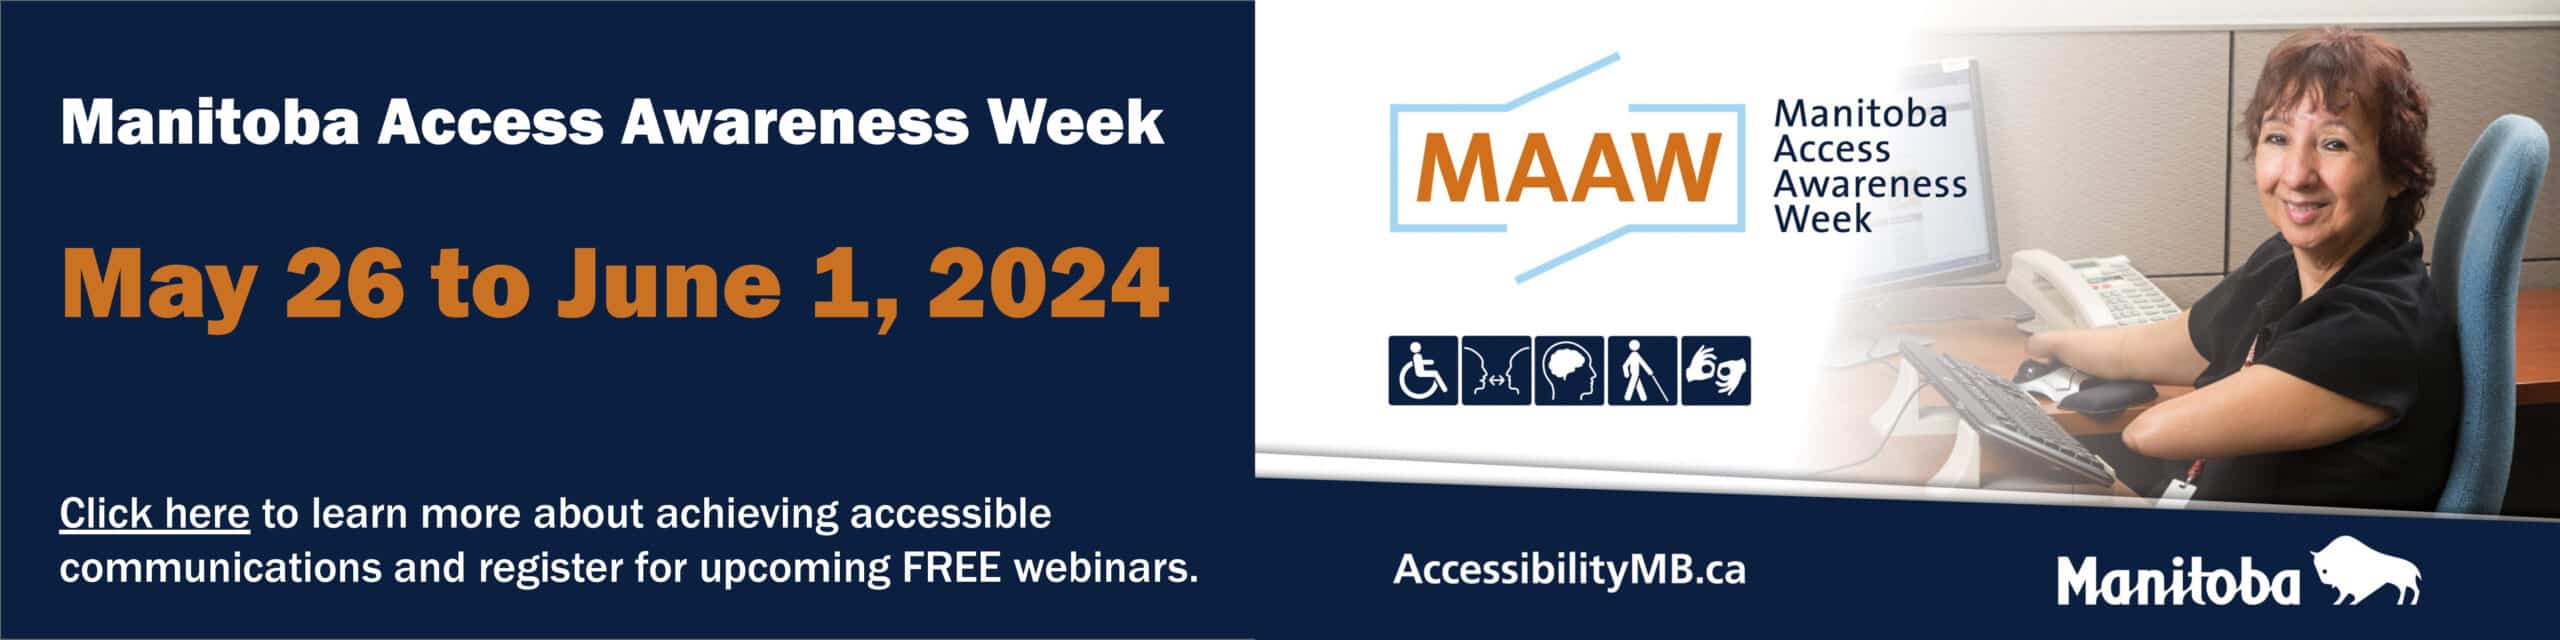 Web Banner which links to AccessibilityMB.ca Text reads: Manitoba Access Awareness Week. May 26 to June 1, 2024. Click here to learn more about achieving accessible communications and register for free upcoming webinars.